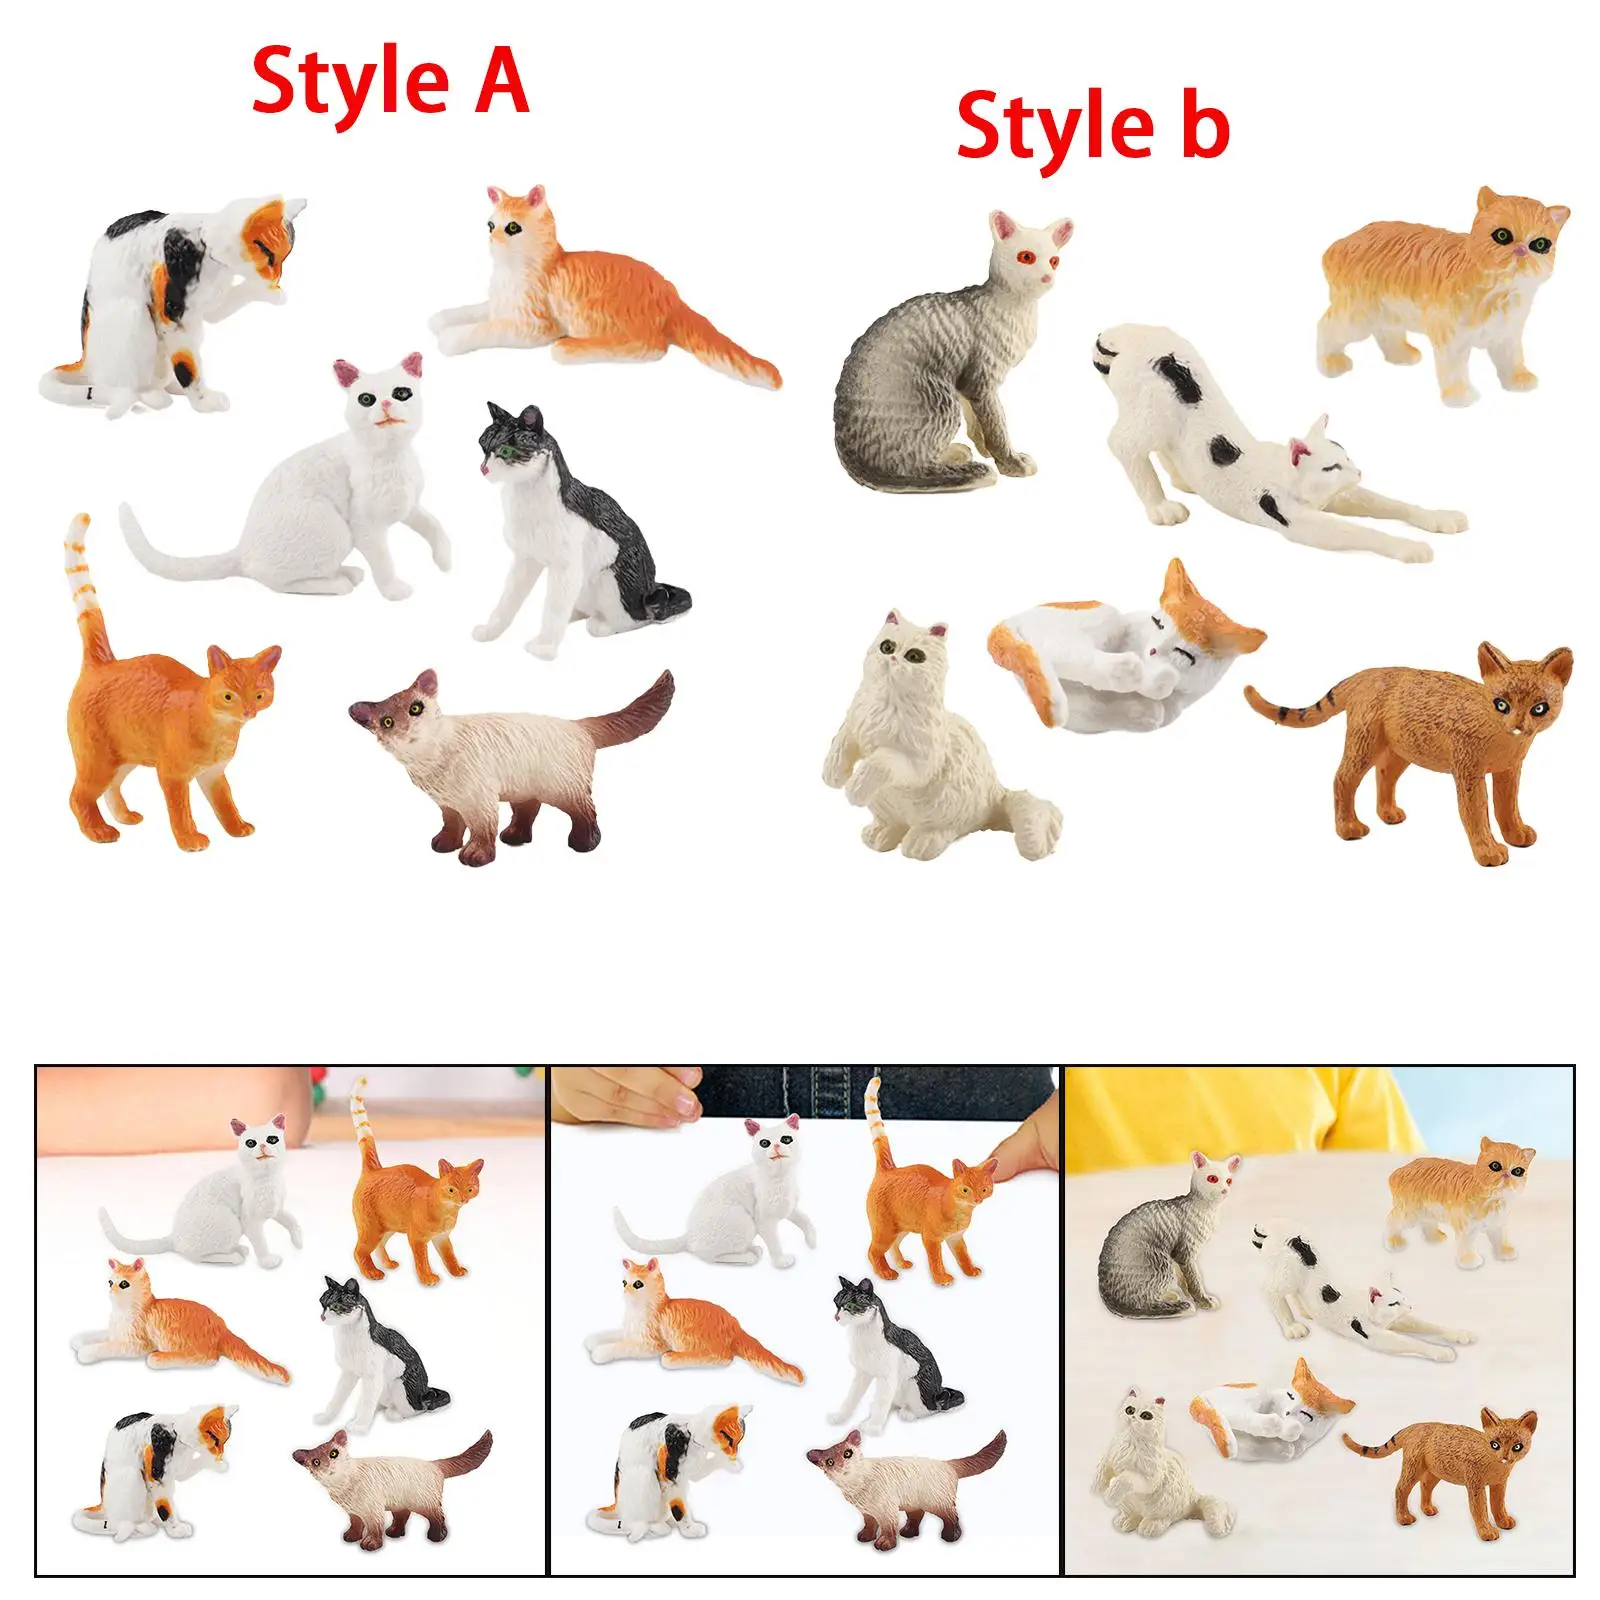 Animal Model Simulation Cat Toy Lifelike Collectibles Portable Ornament Figurine for Lawn Bedroom Housewarming Landscape Kids